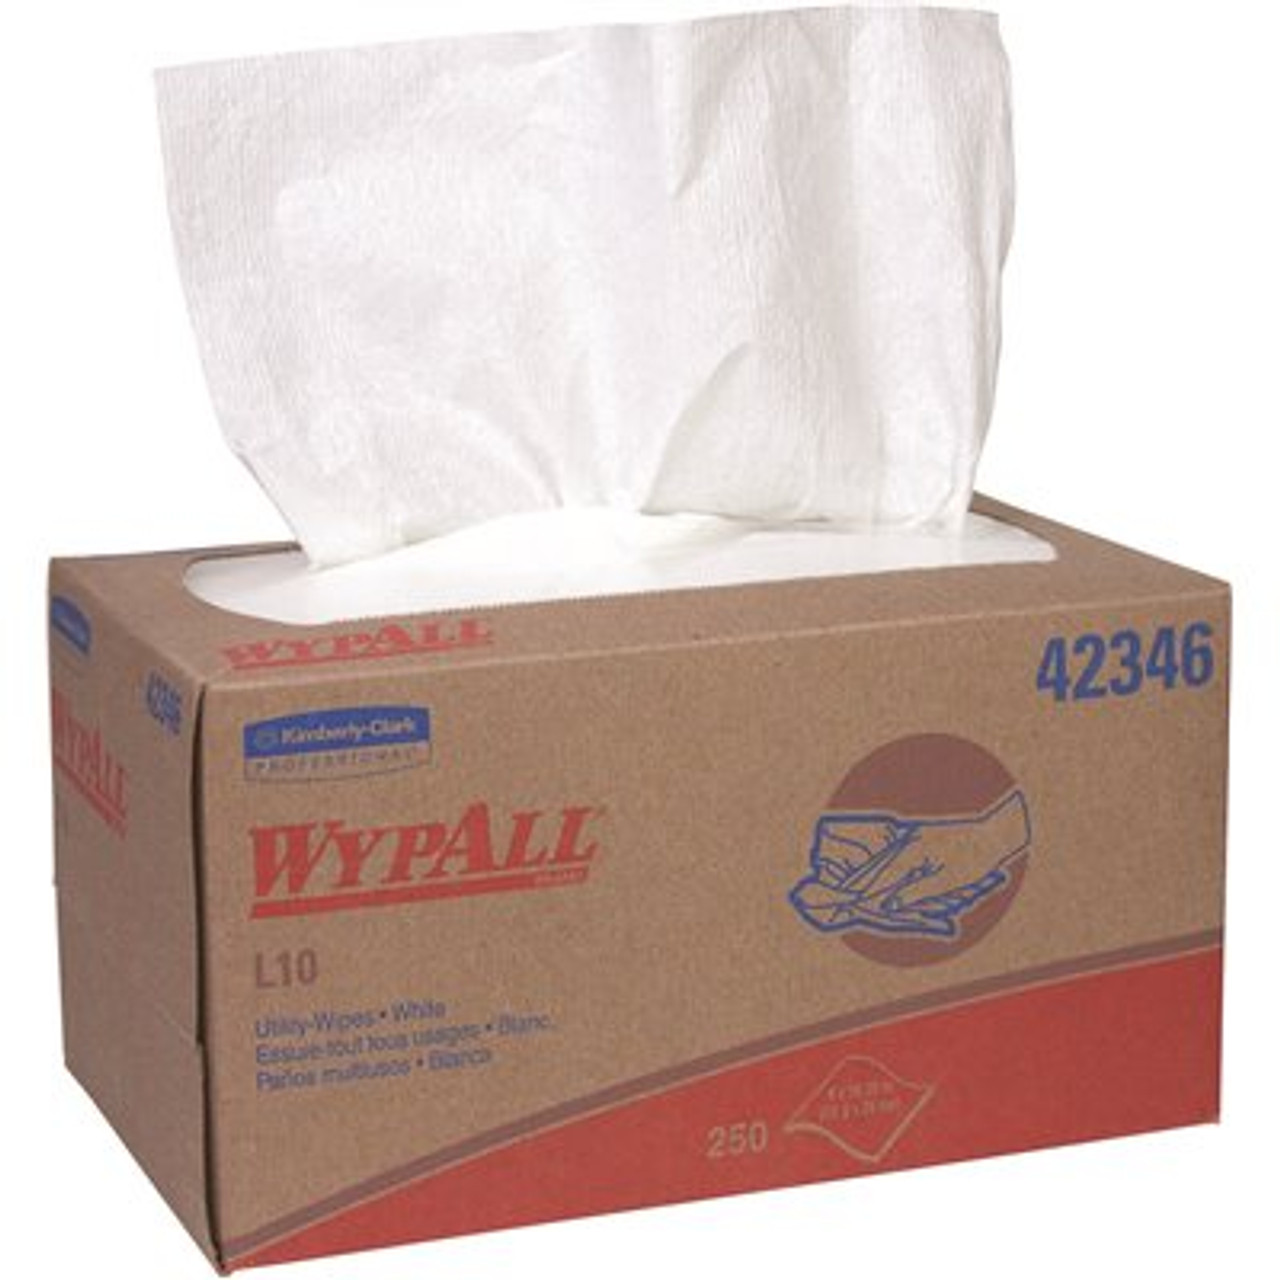 WYPALL L10 Disposable Towels